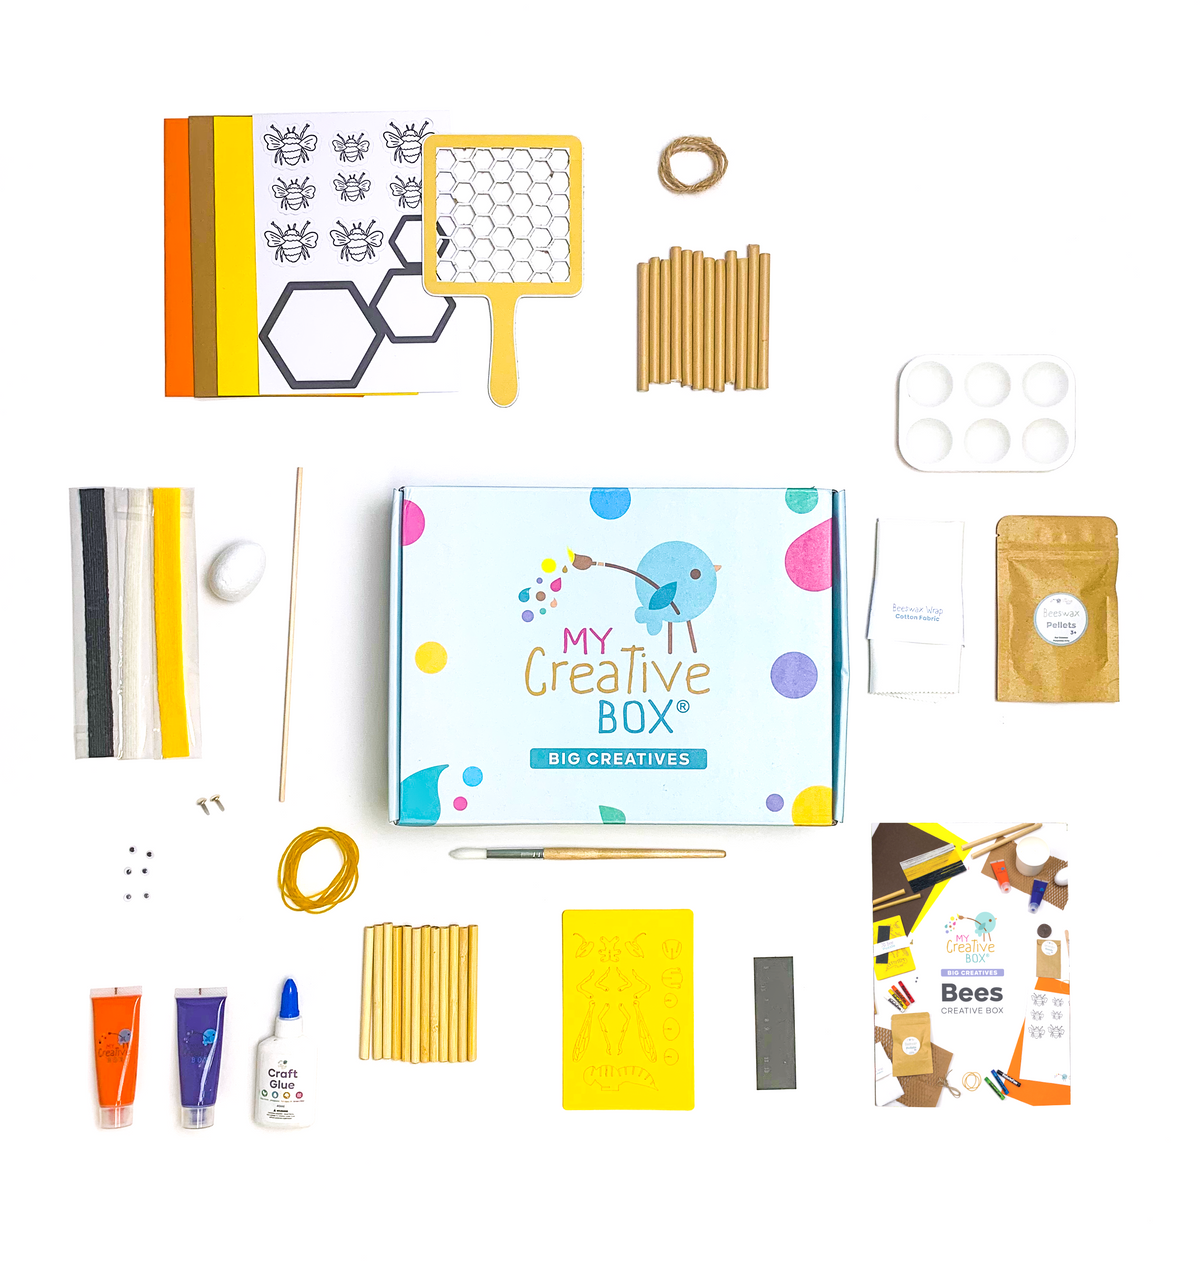 [ARCHIVE] 8 to 10 Years | Big Creatives Box Subscription (a)